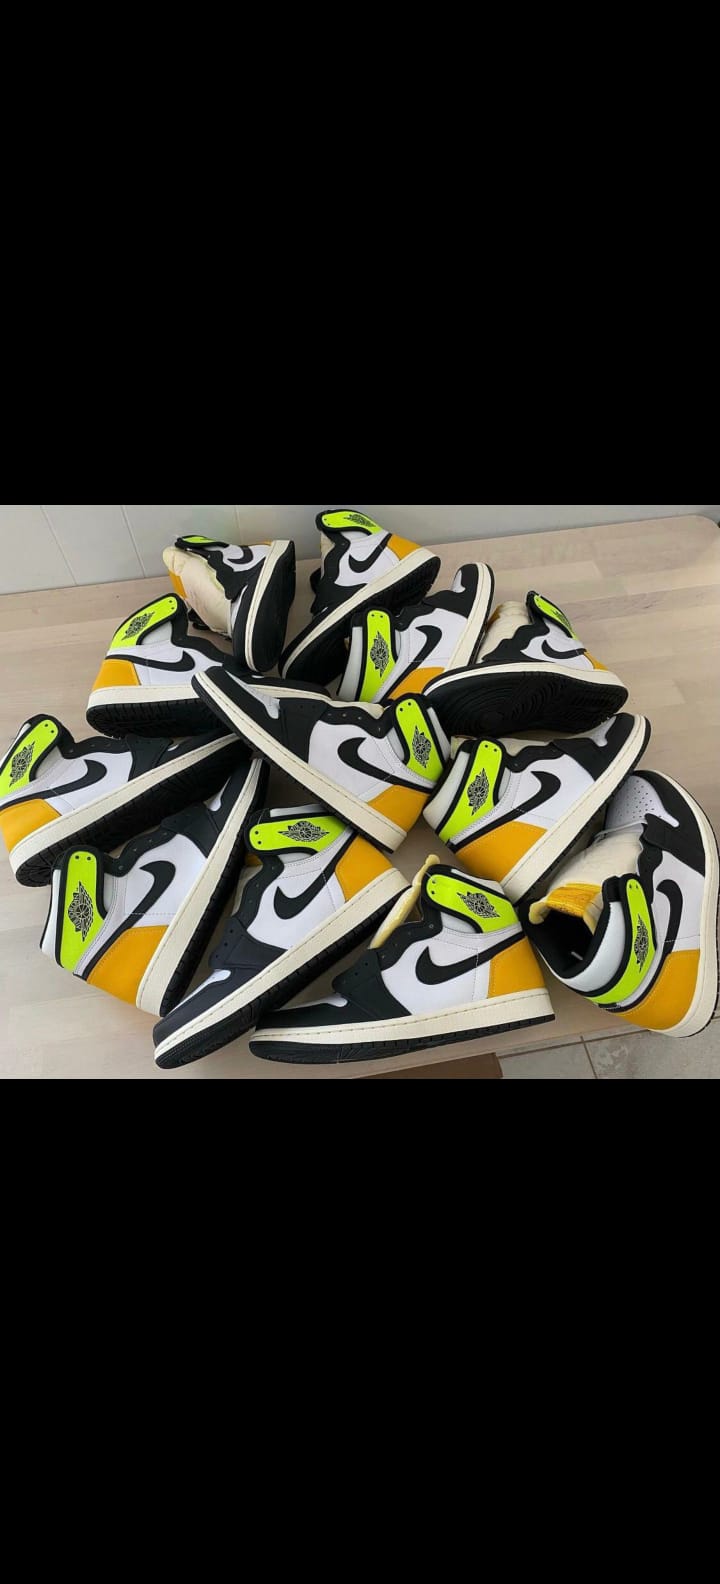 Neon Green Orange Whitw Black Sports High Ankle Shoes 555088118